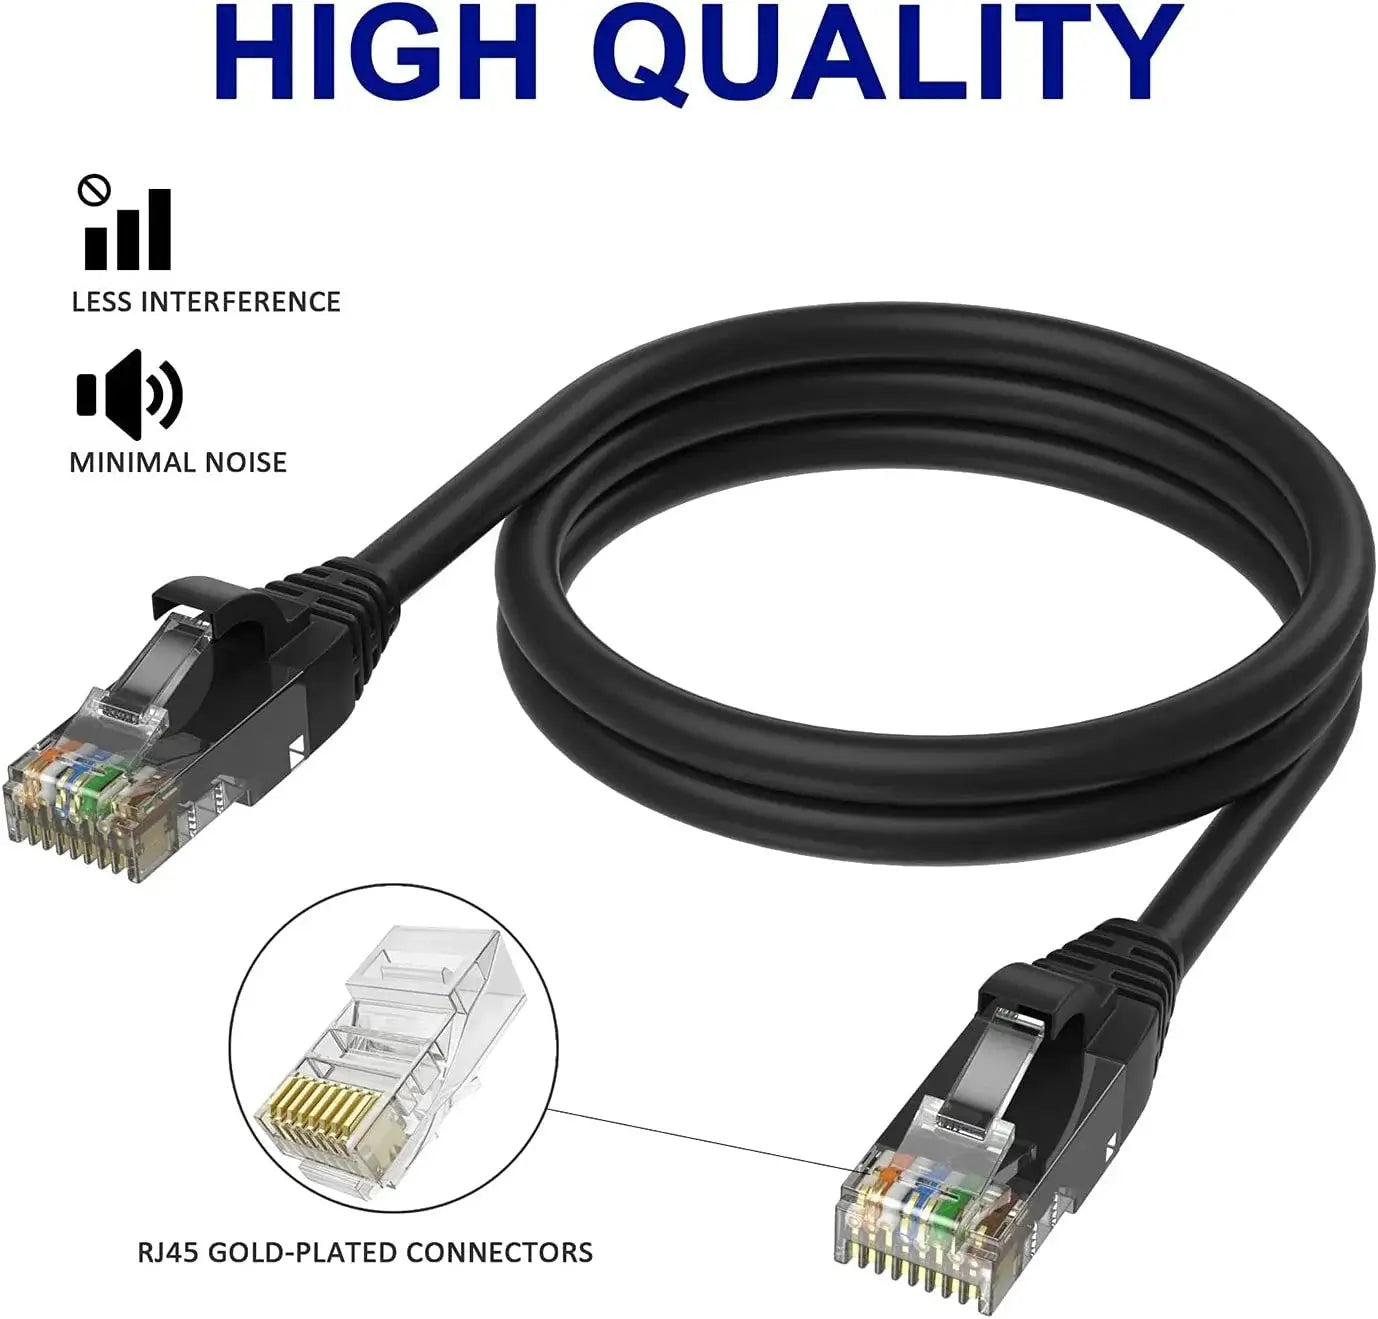 Lan Cable Cat5 RJ45 Netwrok Cable for Security Camera Home